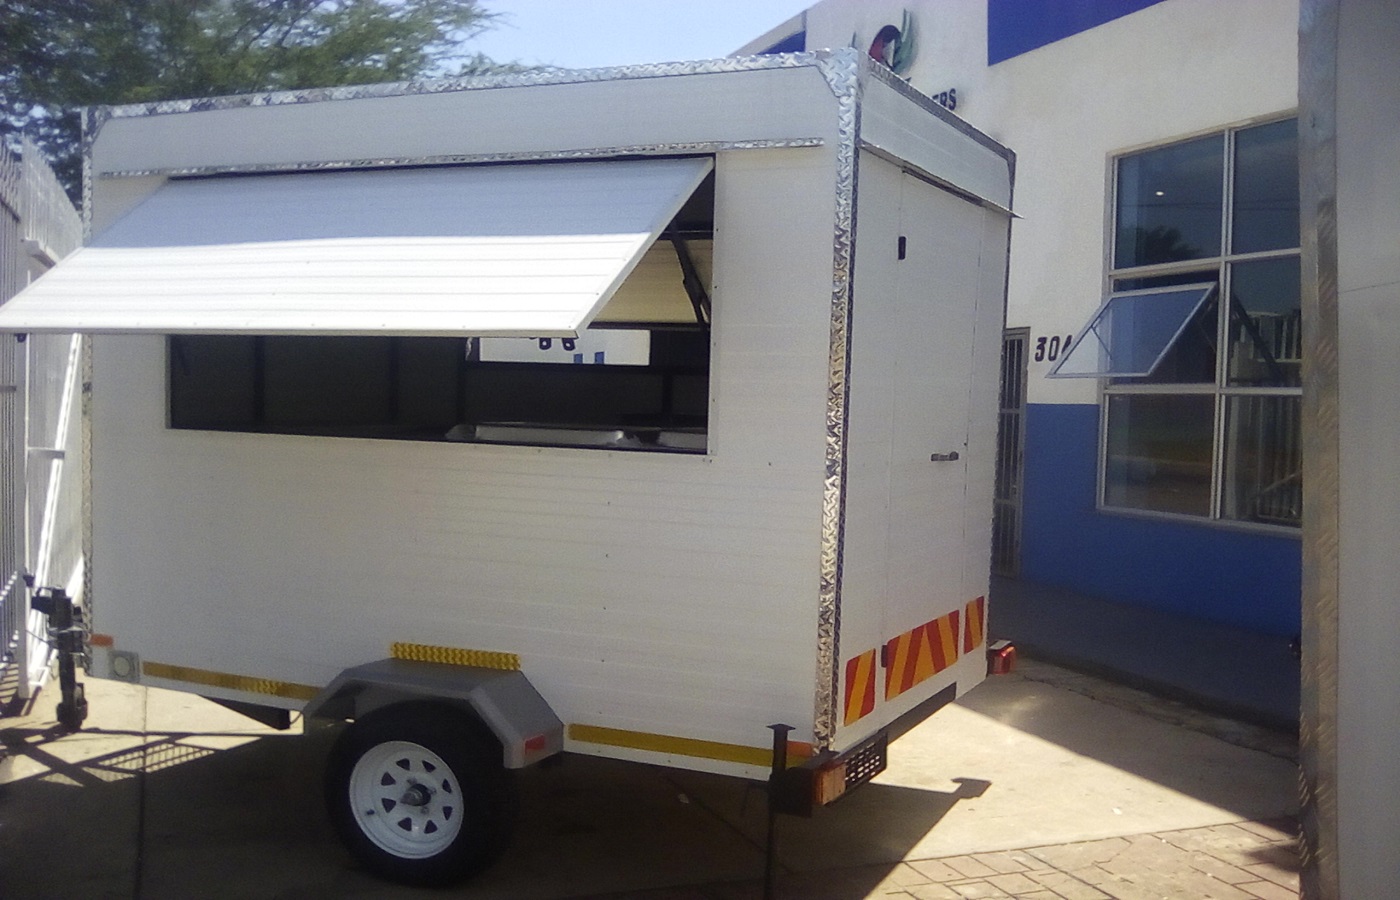 Msf Trailer Manufacturers Mobile Kitchens Mobile Kitchens For Sale Food Trailers Food Trailers For Sale Trailers For Sale Mobile Toilets Mobile Freezers Chicken Trailers Luggage Trailers Cold Rooms And Livestock Trailers